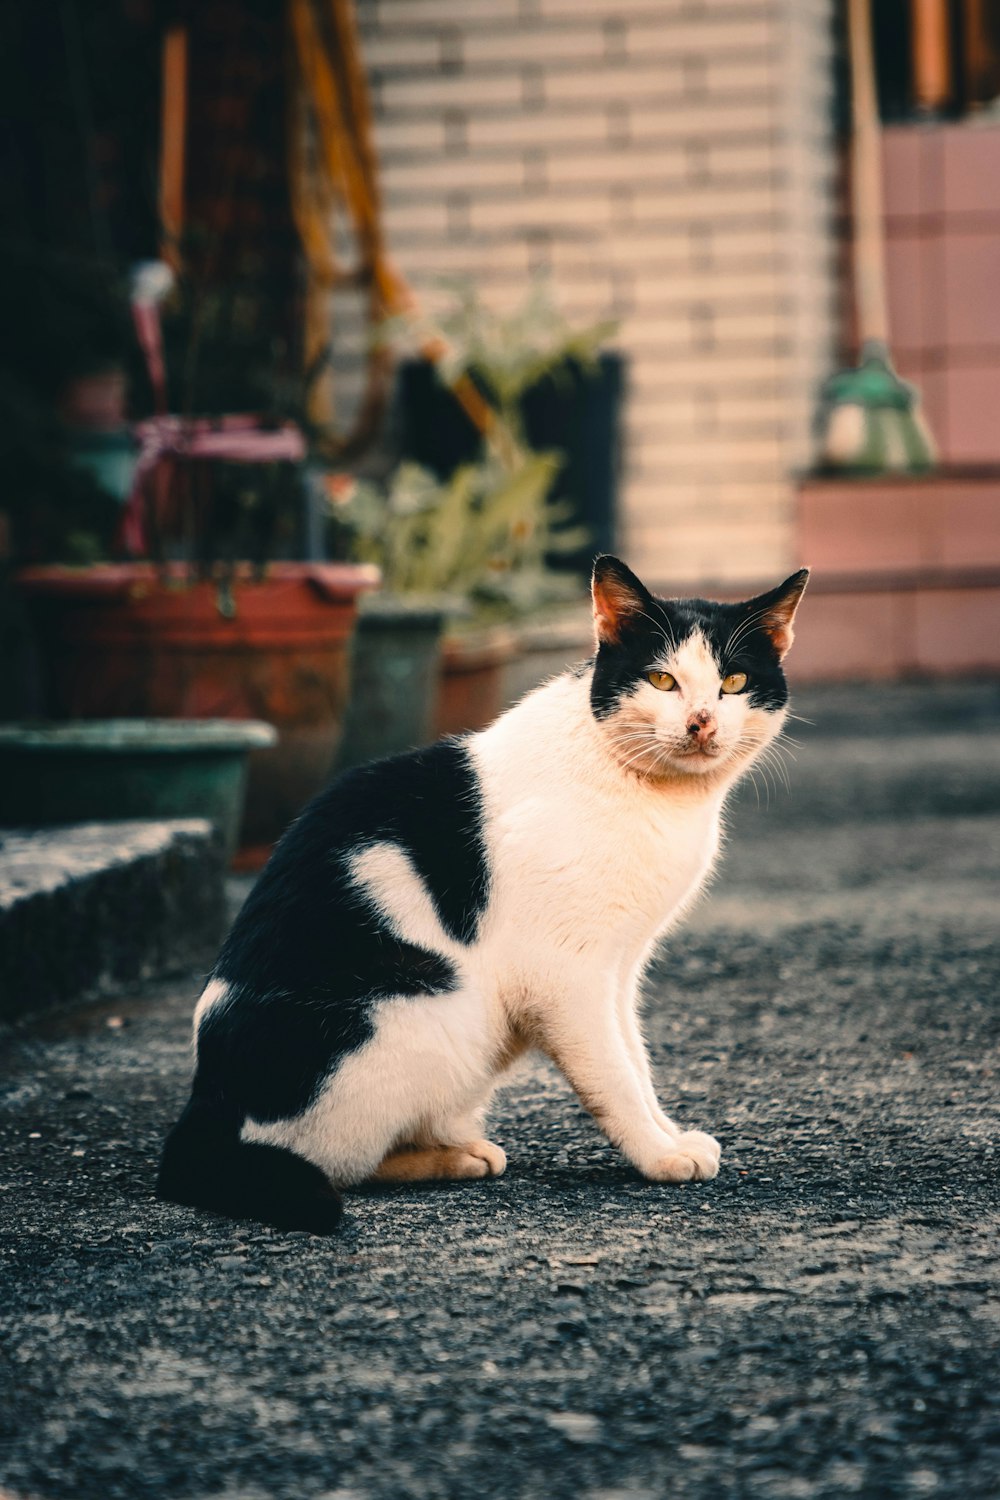 a black and white cat sitting on the ground